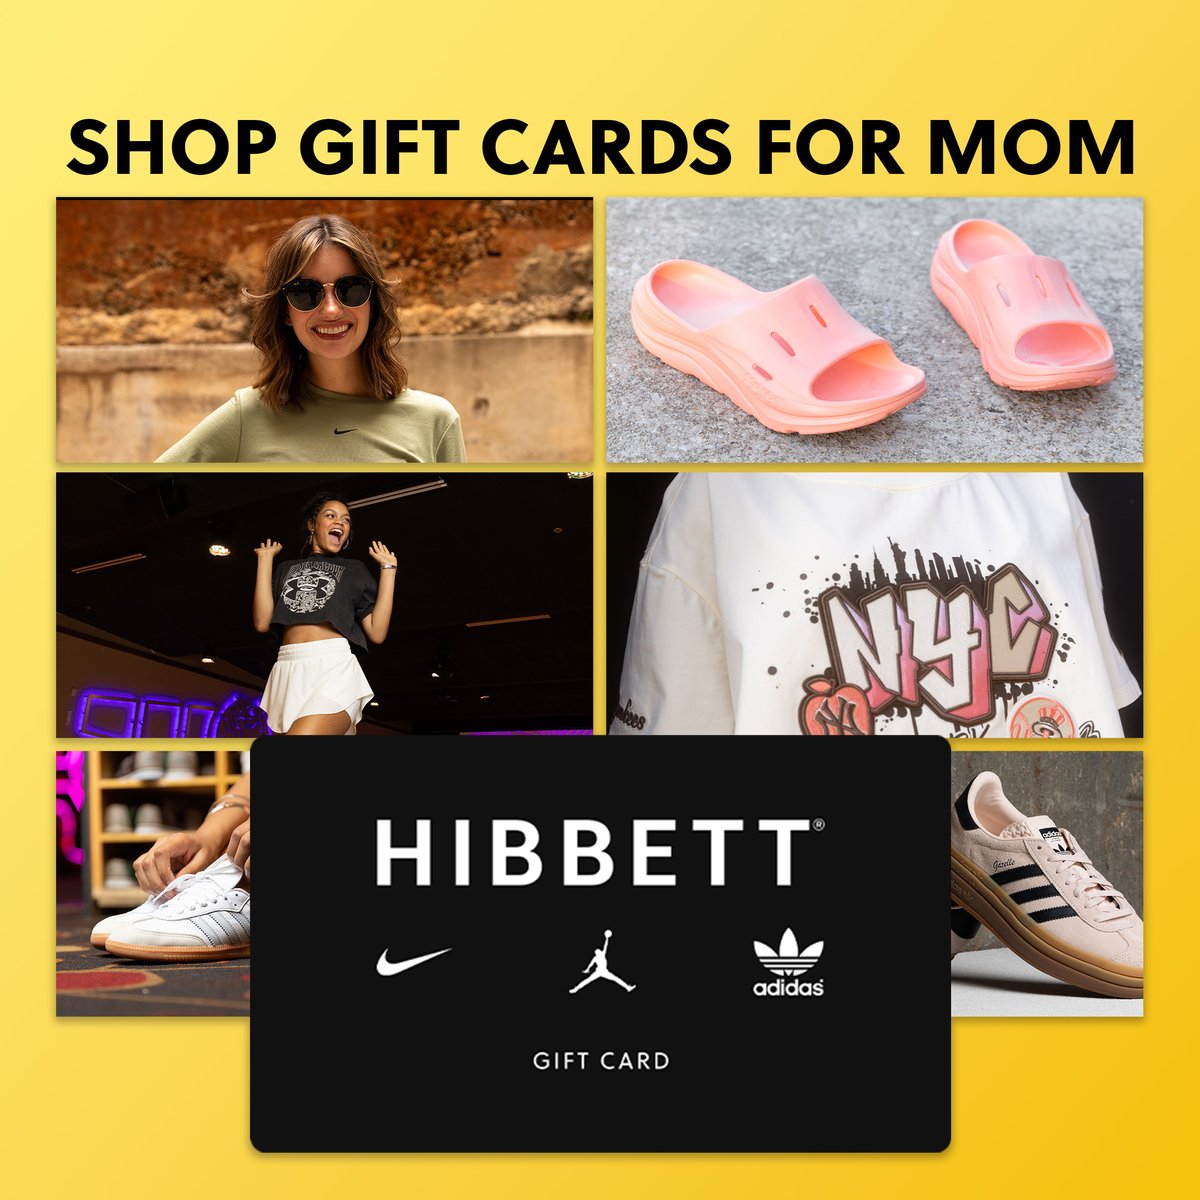 Shop Gift Cards for Mom! 💳 💳 ✨ bit.ly/3UOk4YK #MothersDay #FittedByHibbett #GiftCard